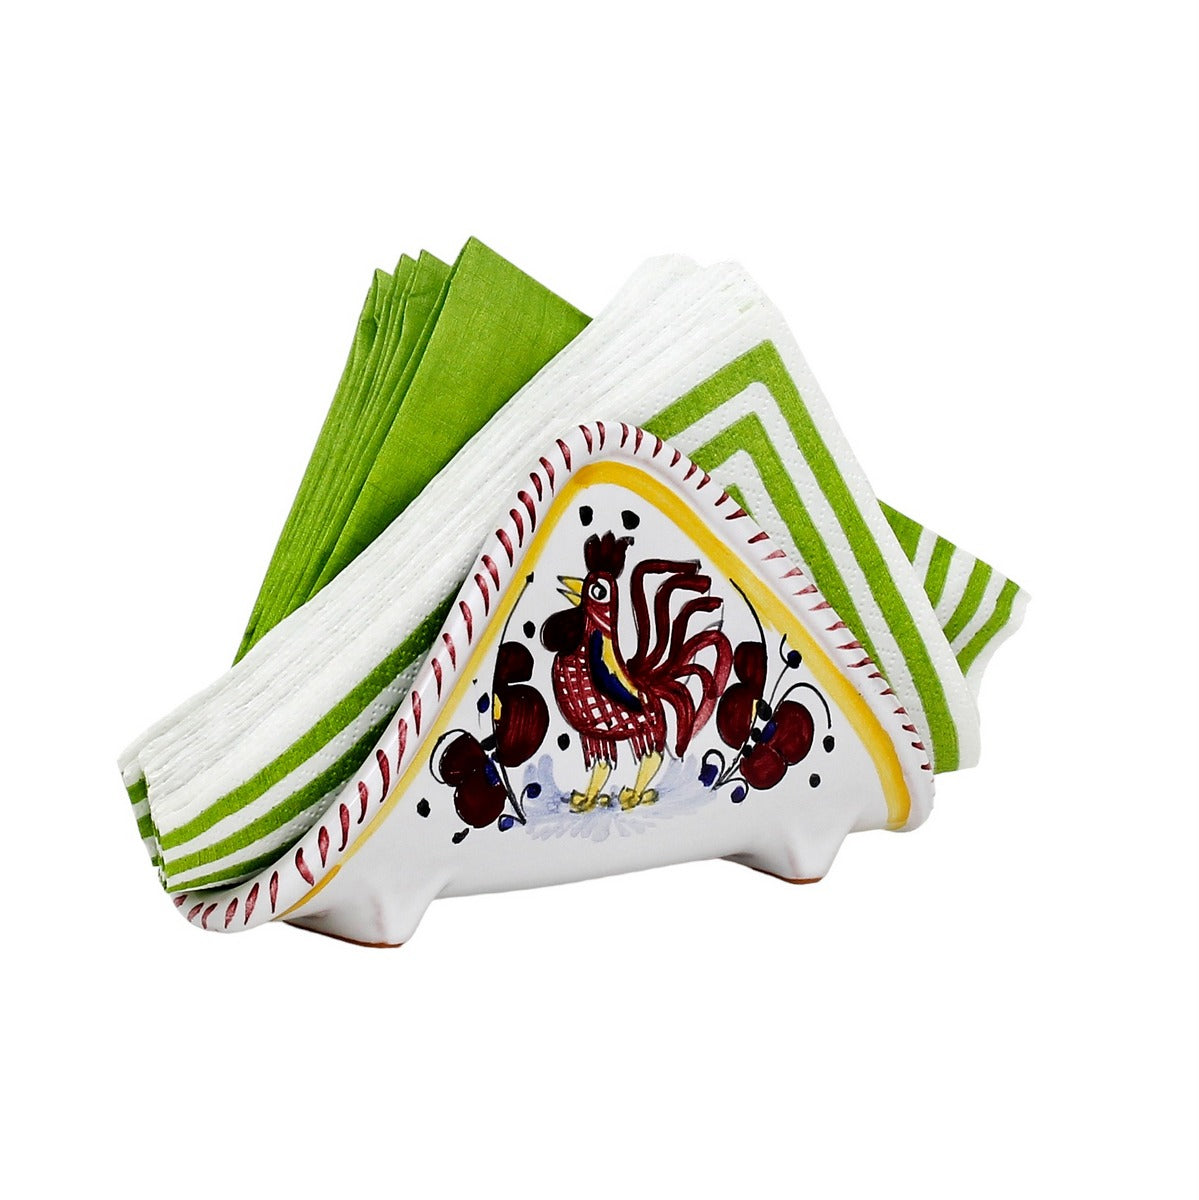 GIFT BOX: With authentic Deruta hand painted ceramic - Napkin Holder Red Rooster design